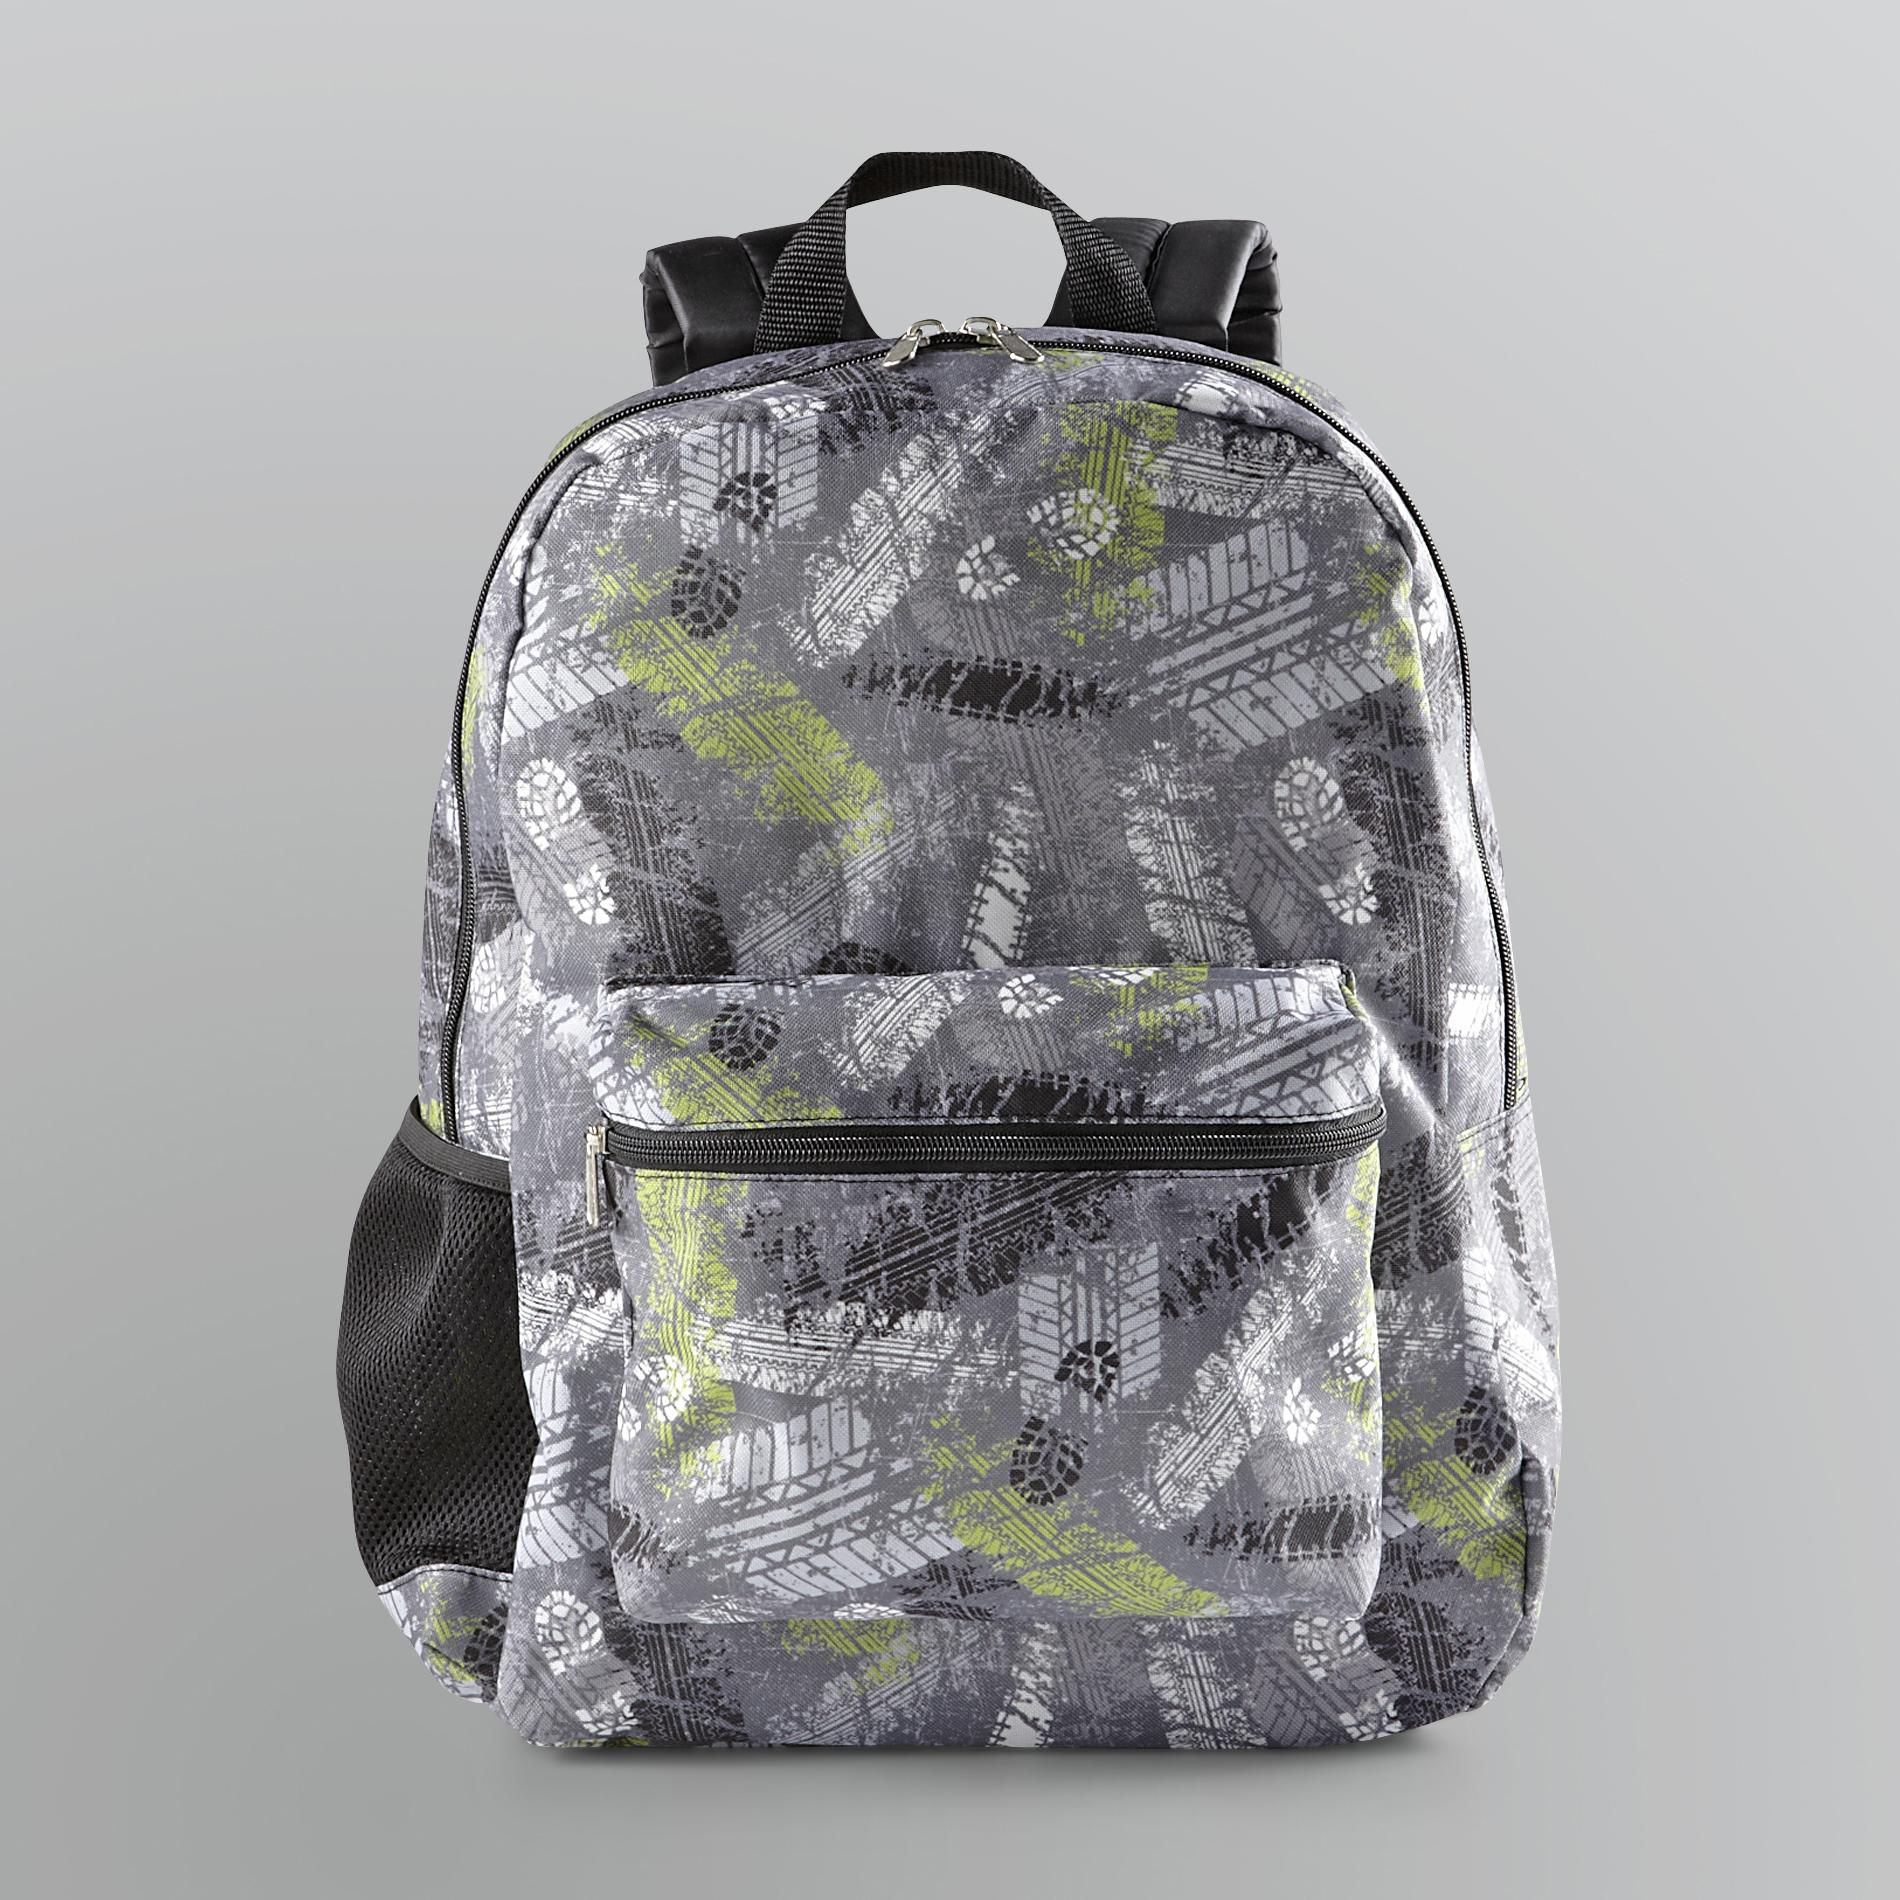 Global Design Concepts Boy's Graphic Print Backpack